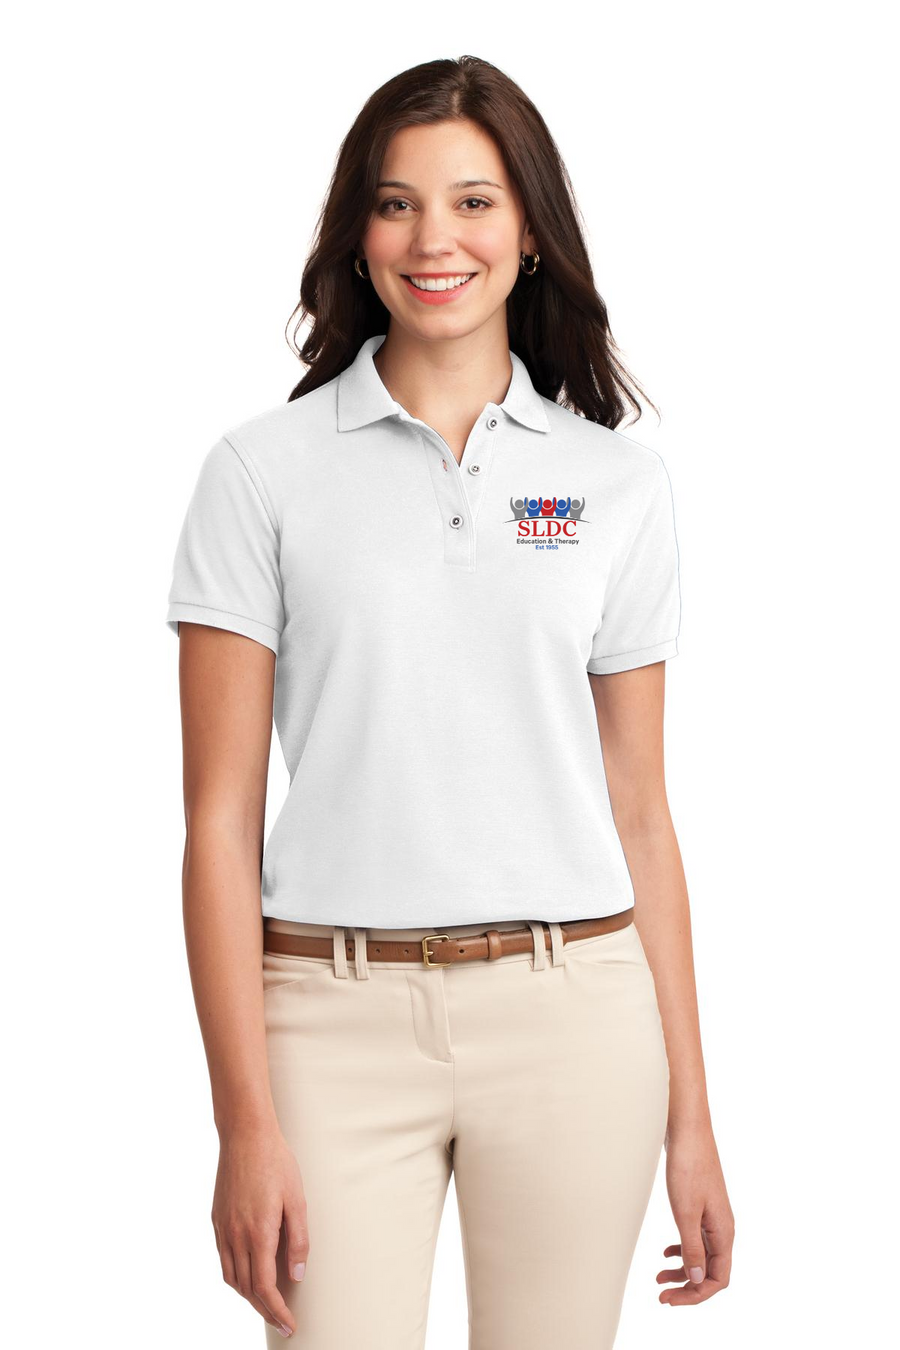 SLDC Spirit Wear On-Demand-Ladies Polo Colored SLDC Education & Theraphy Logo